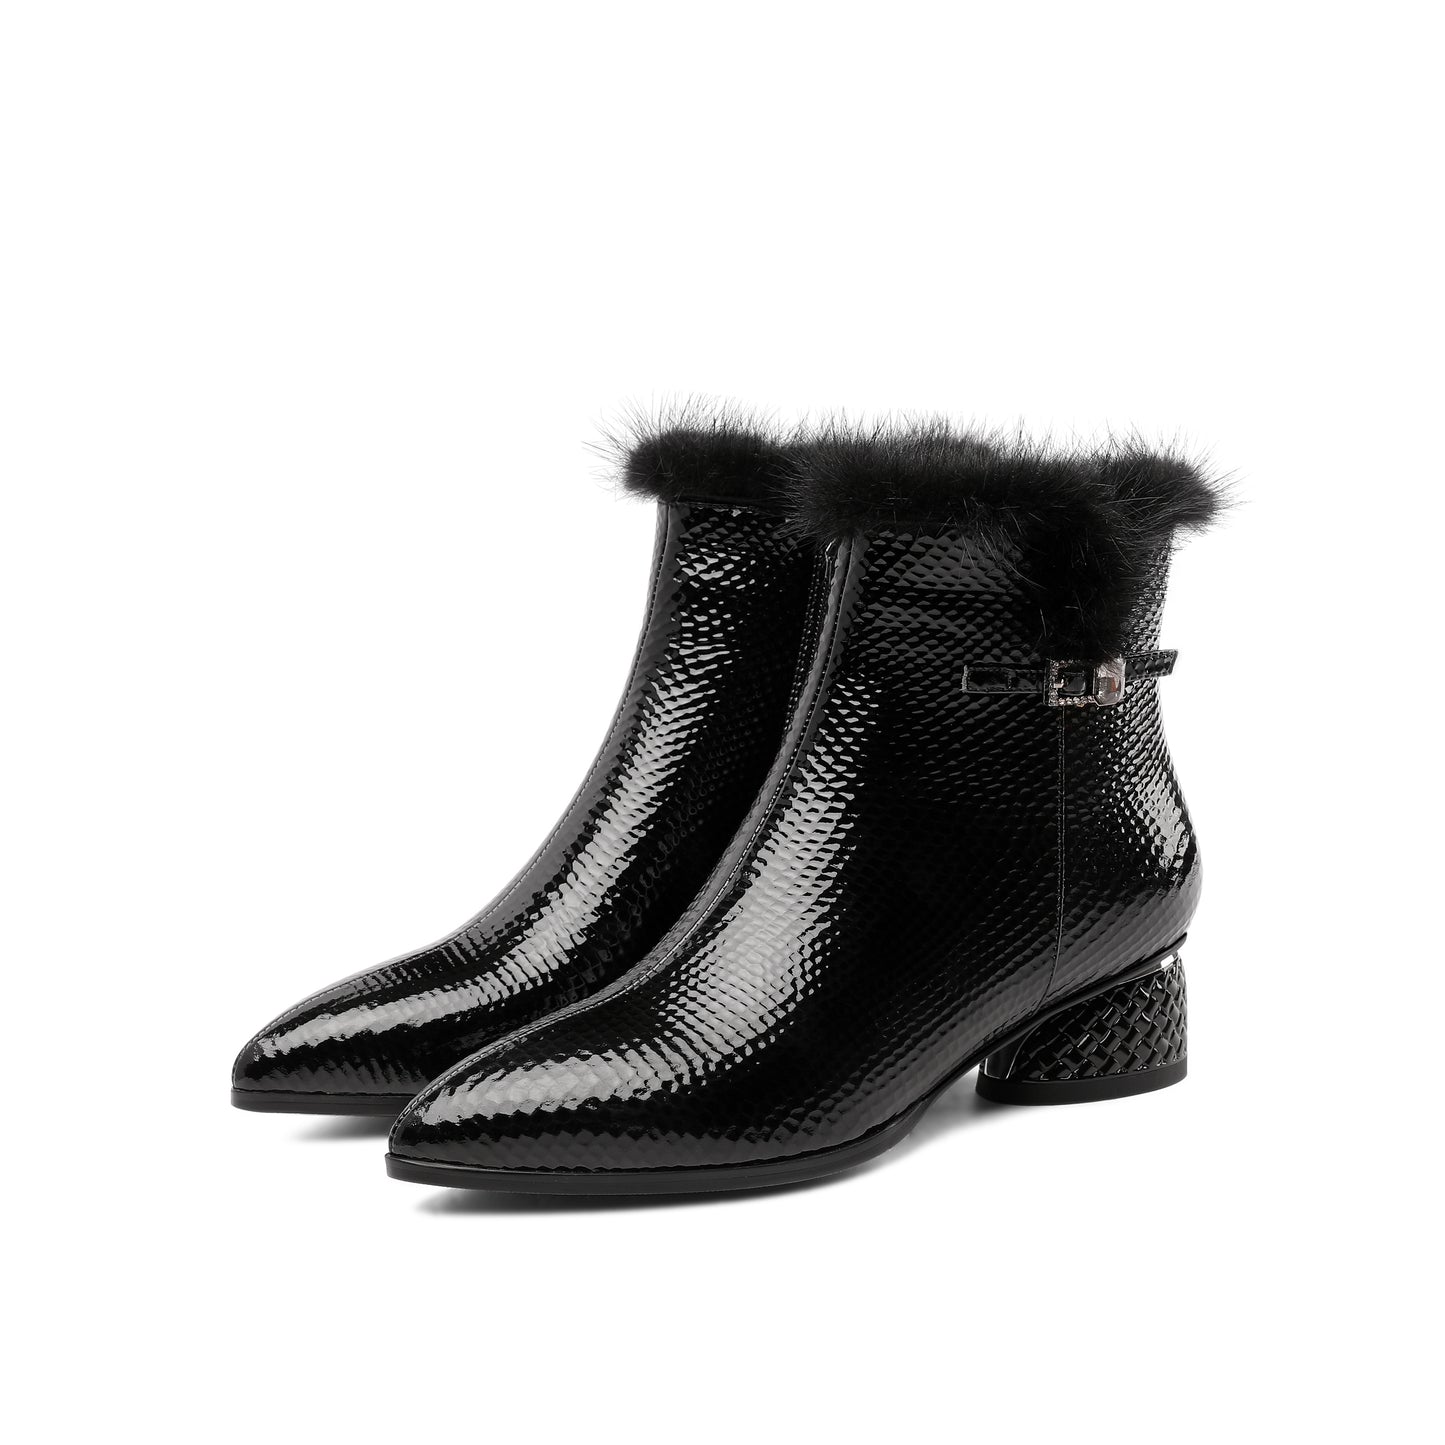 TinaCus Women's Patent Leather Handmade Side Zip Up Block Heel Black Ankle Booties with Fur and Glitter Buckle Decor